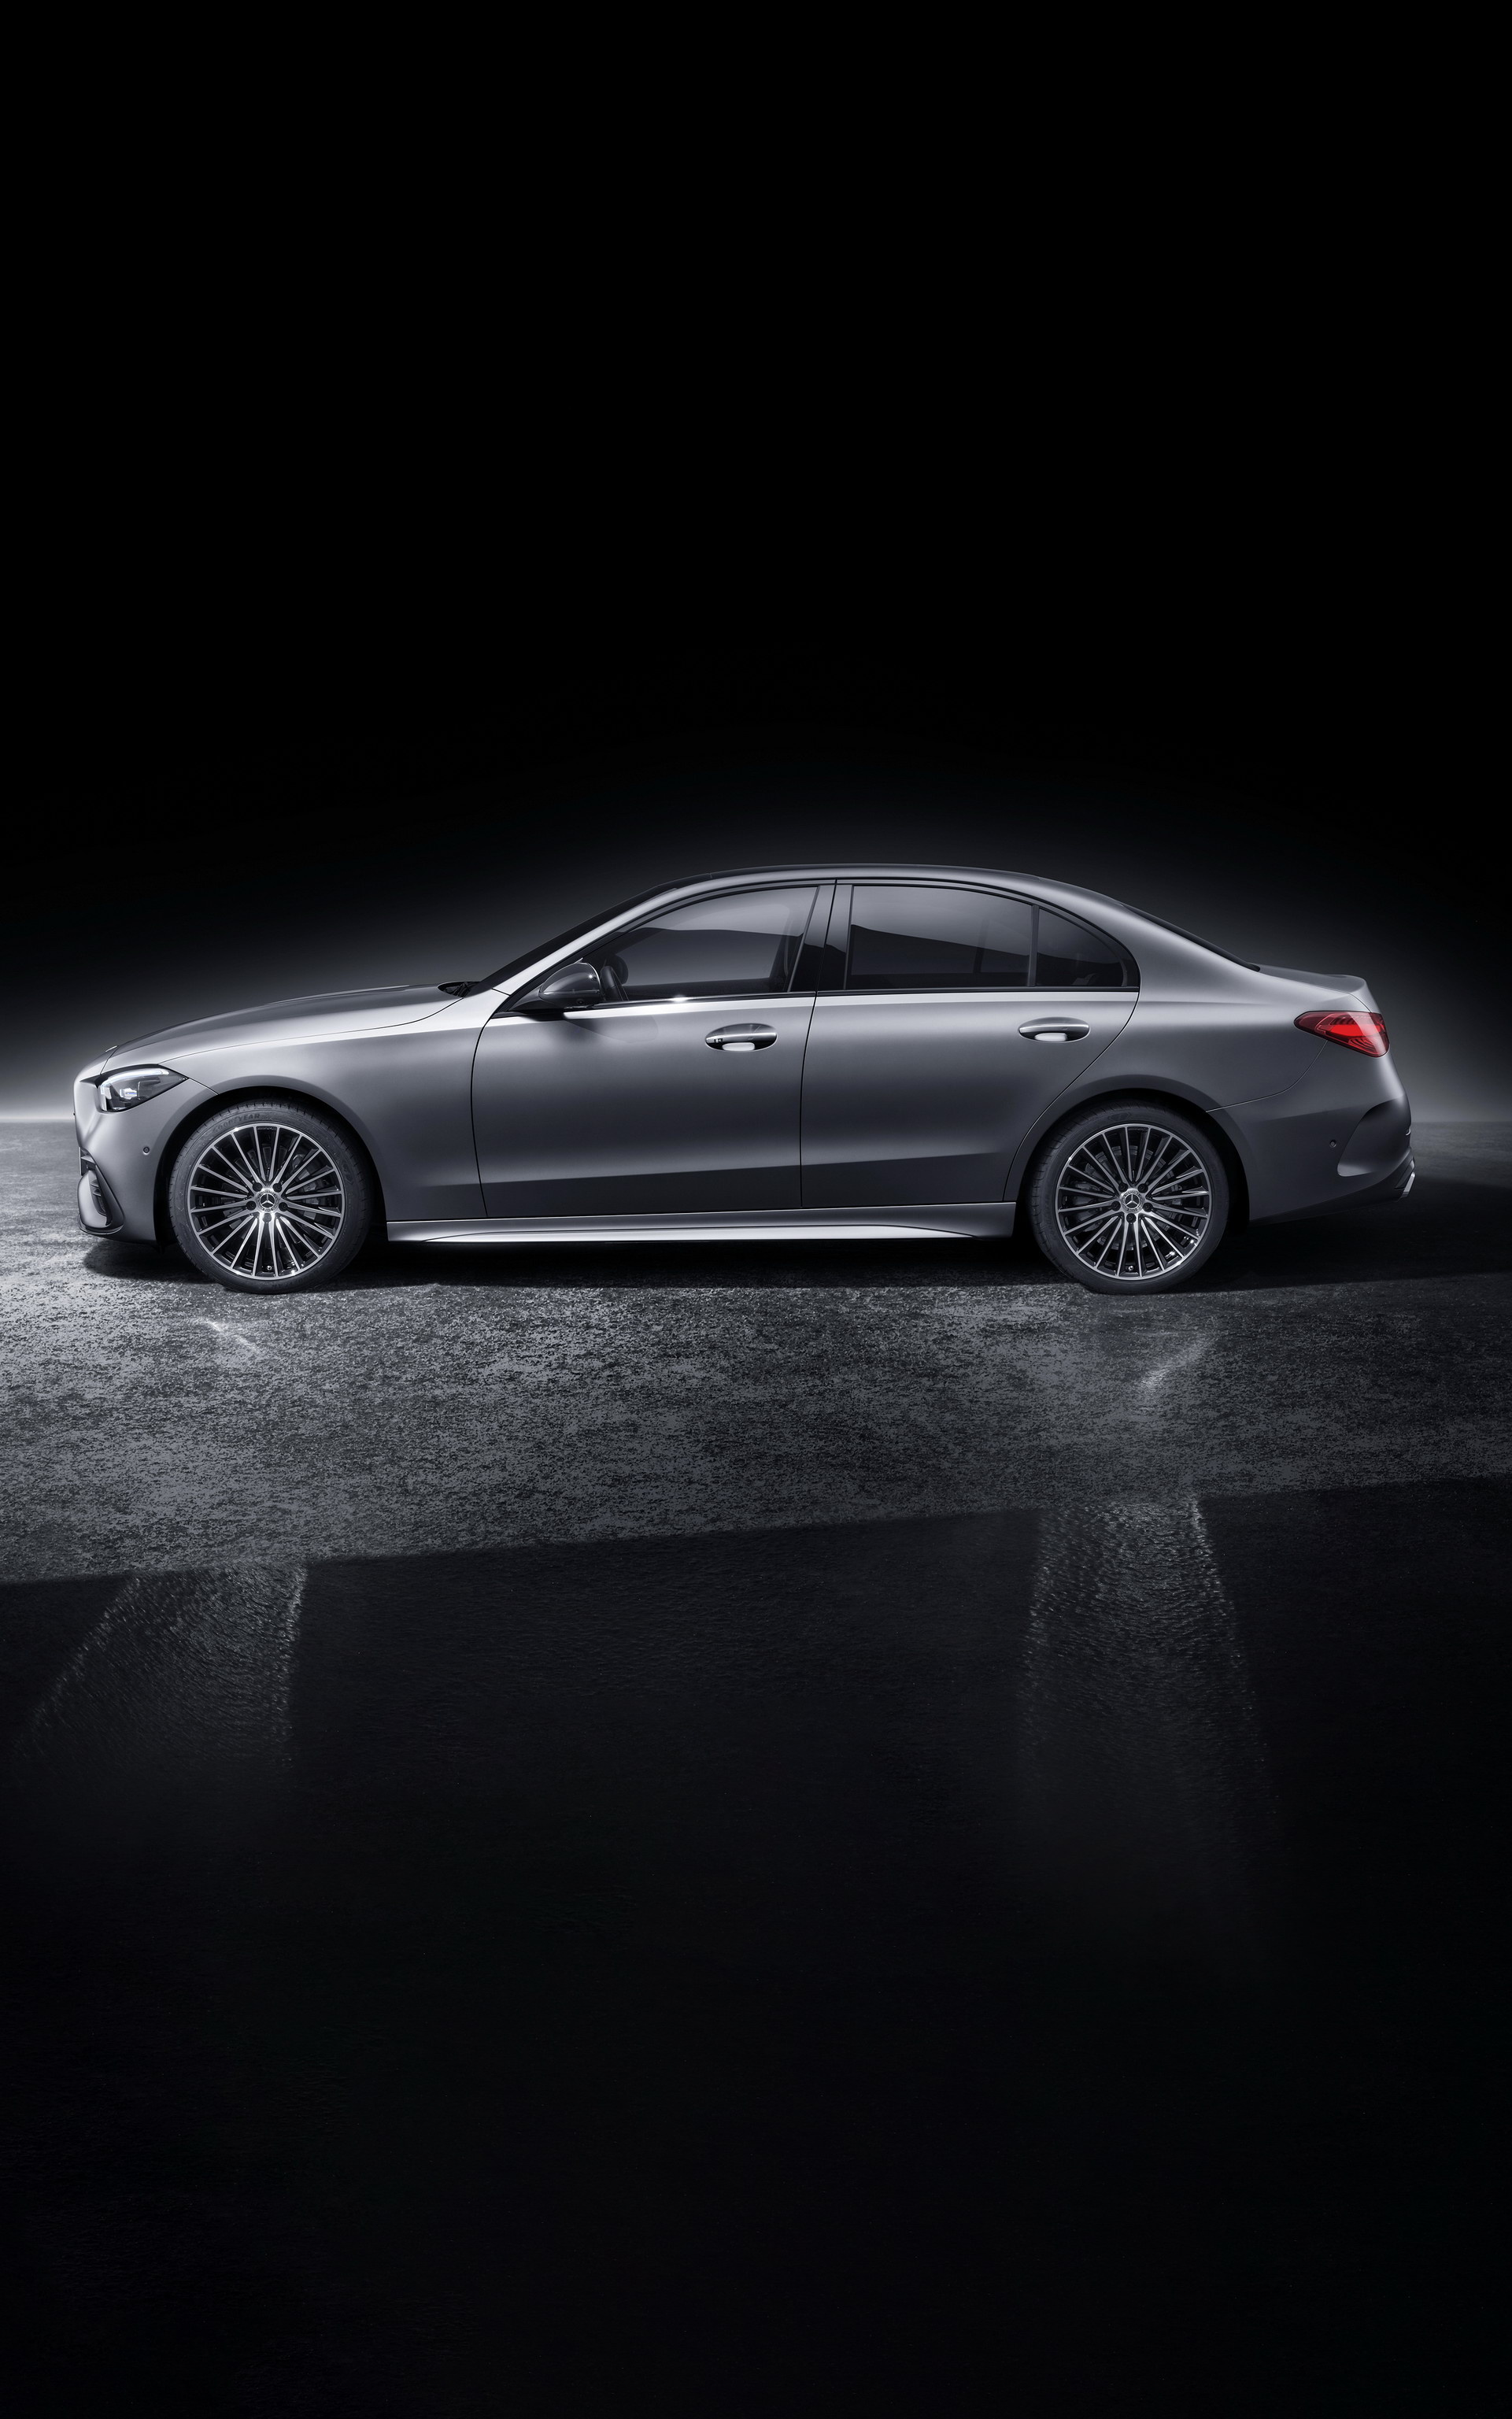 Mercedes-Benz C-Class, Side view, Phone wallpapers, Latest model, 1930x3080 HD Handy